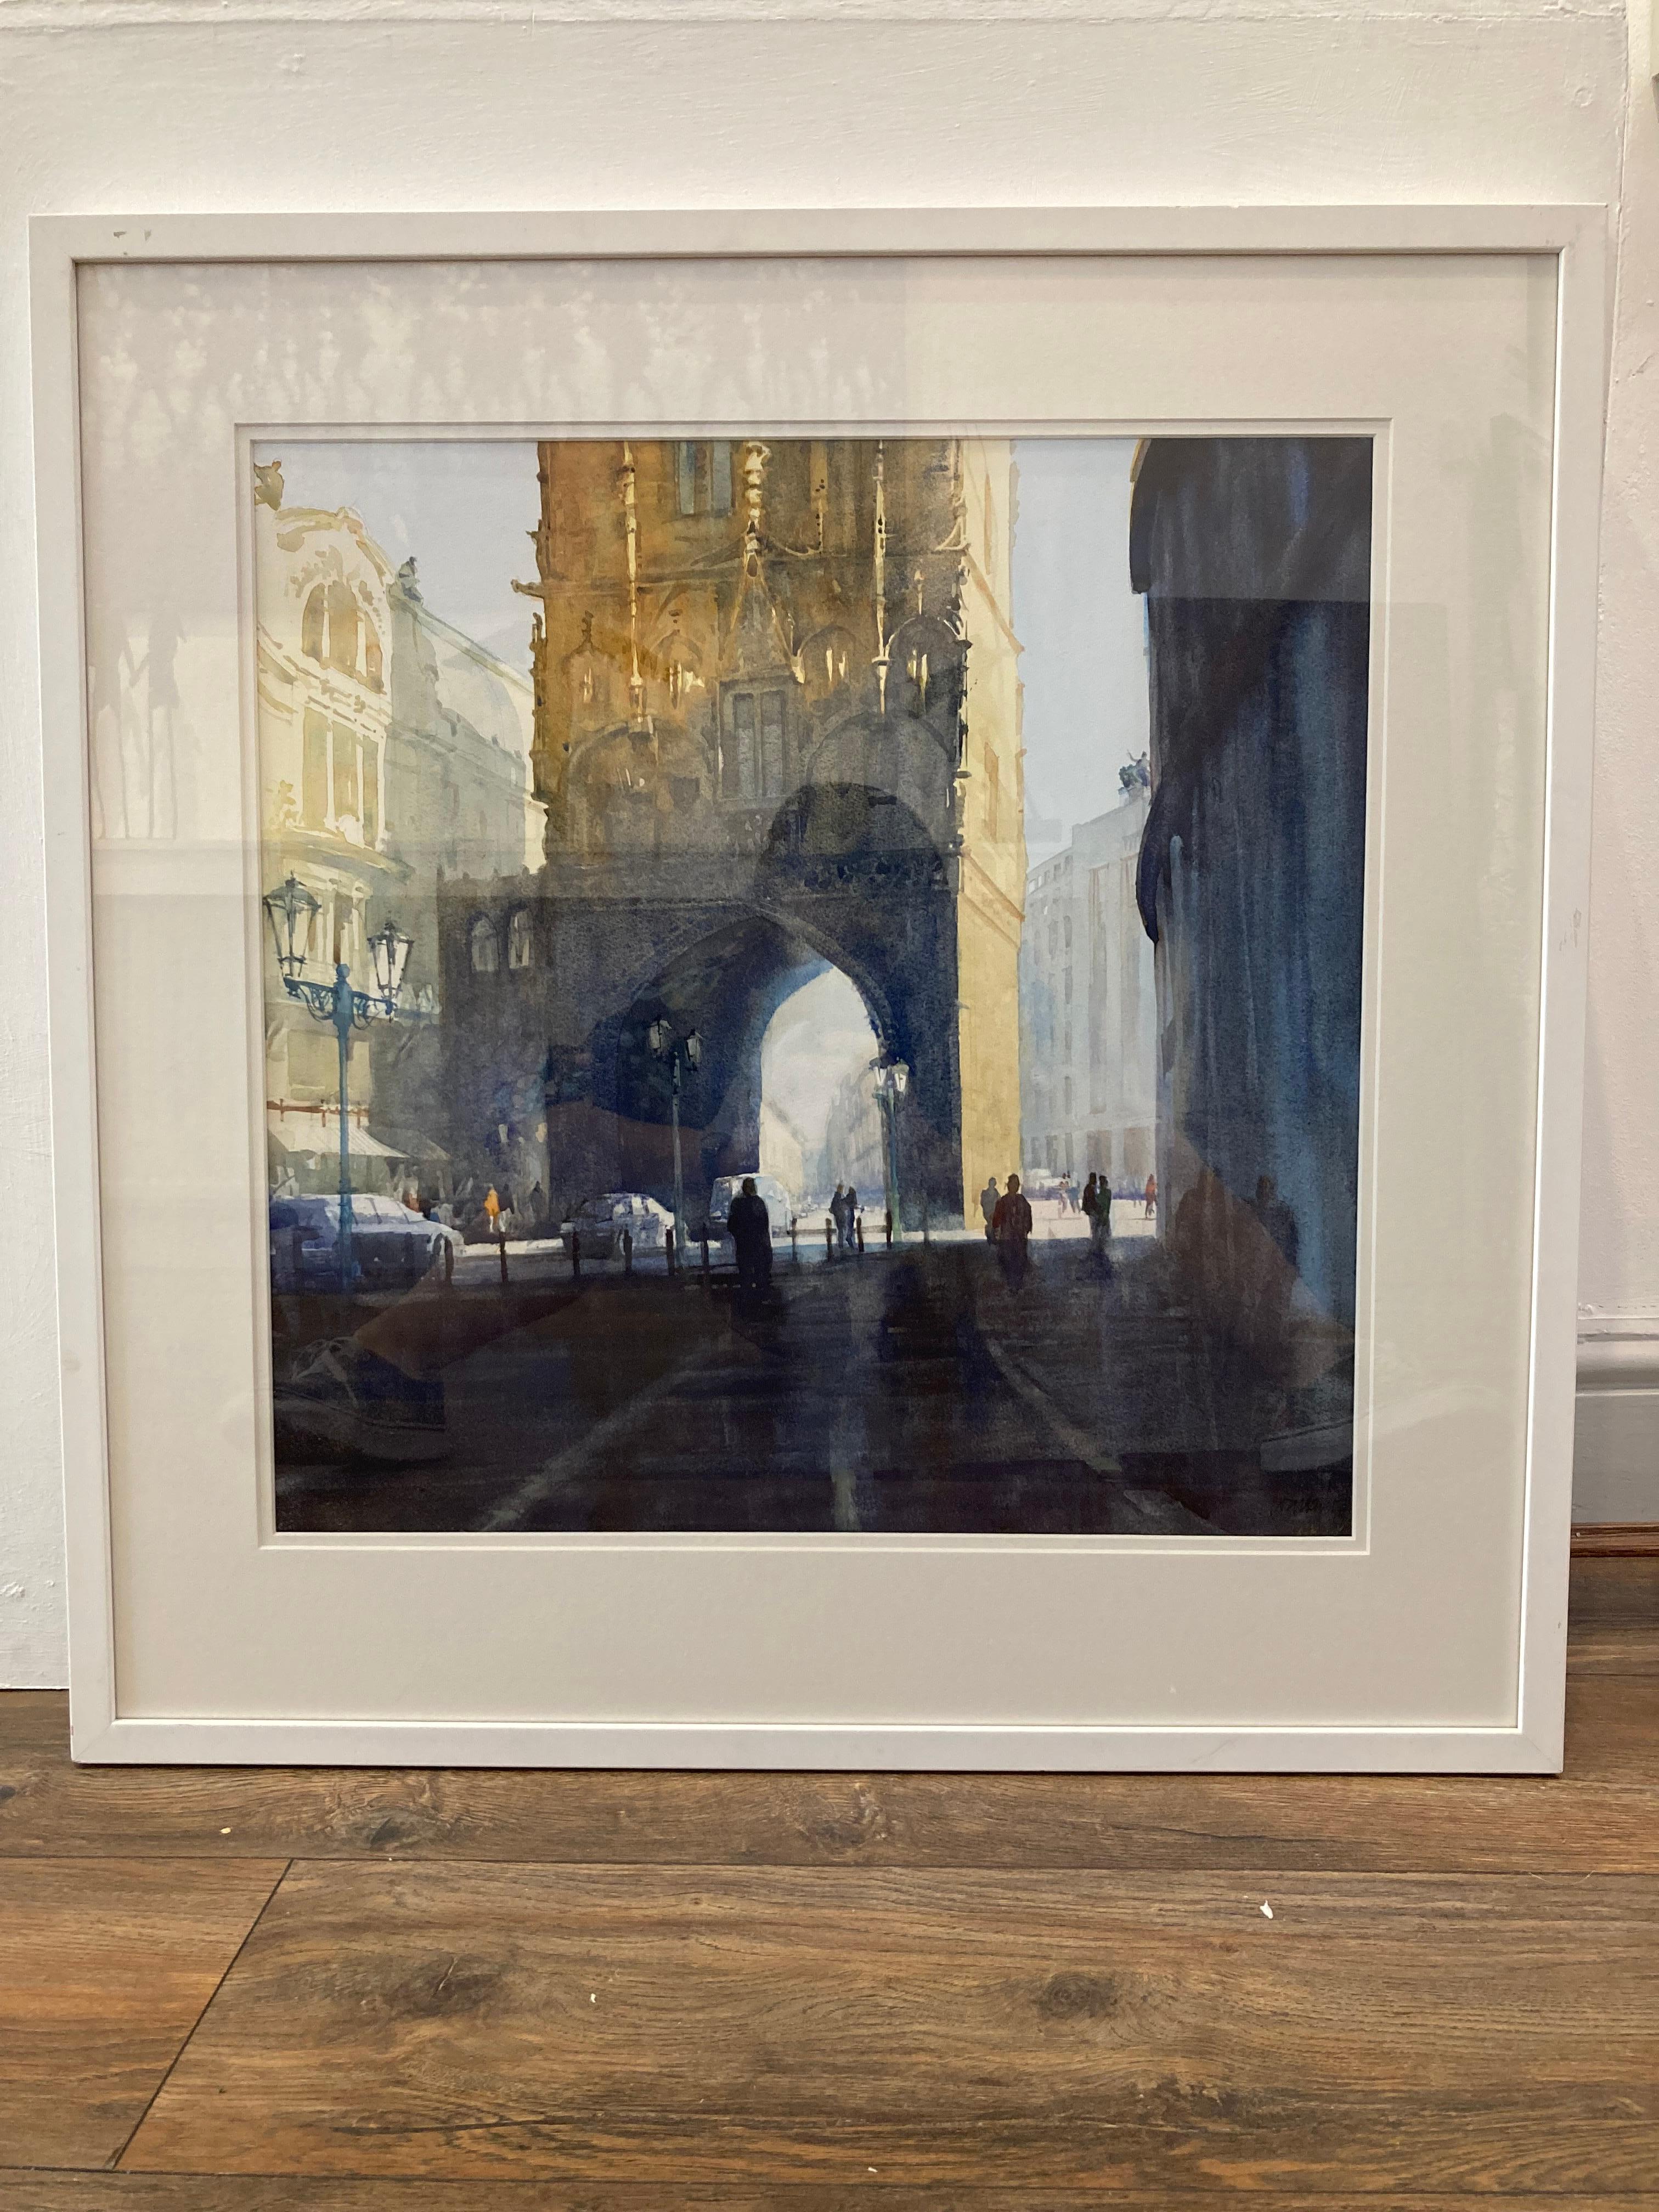 The Powder Tower - illustrative cityscape architecture watercolor paper framed - Art by David Walker